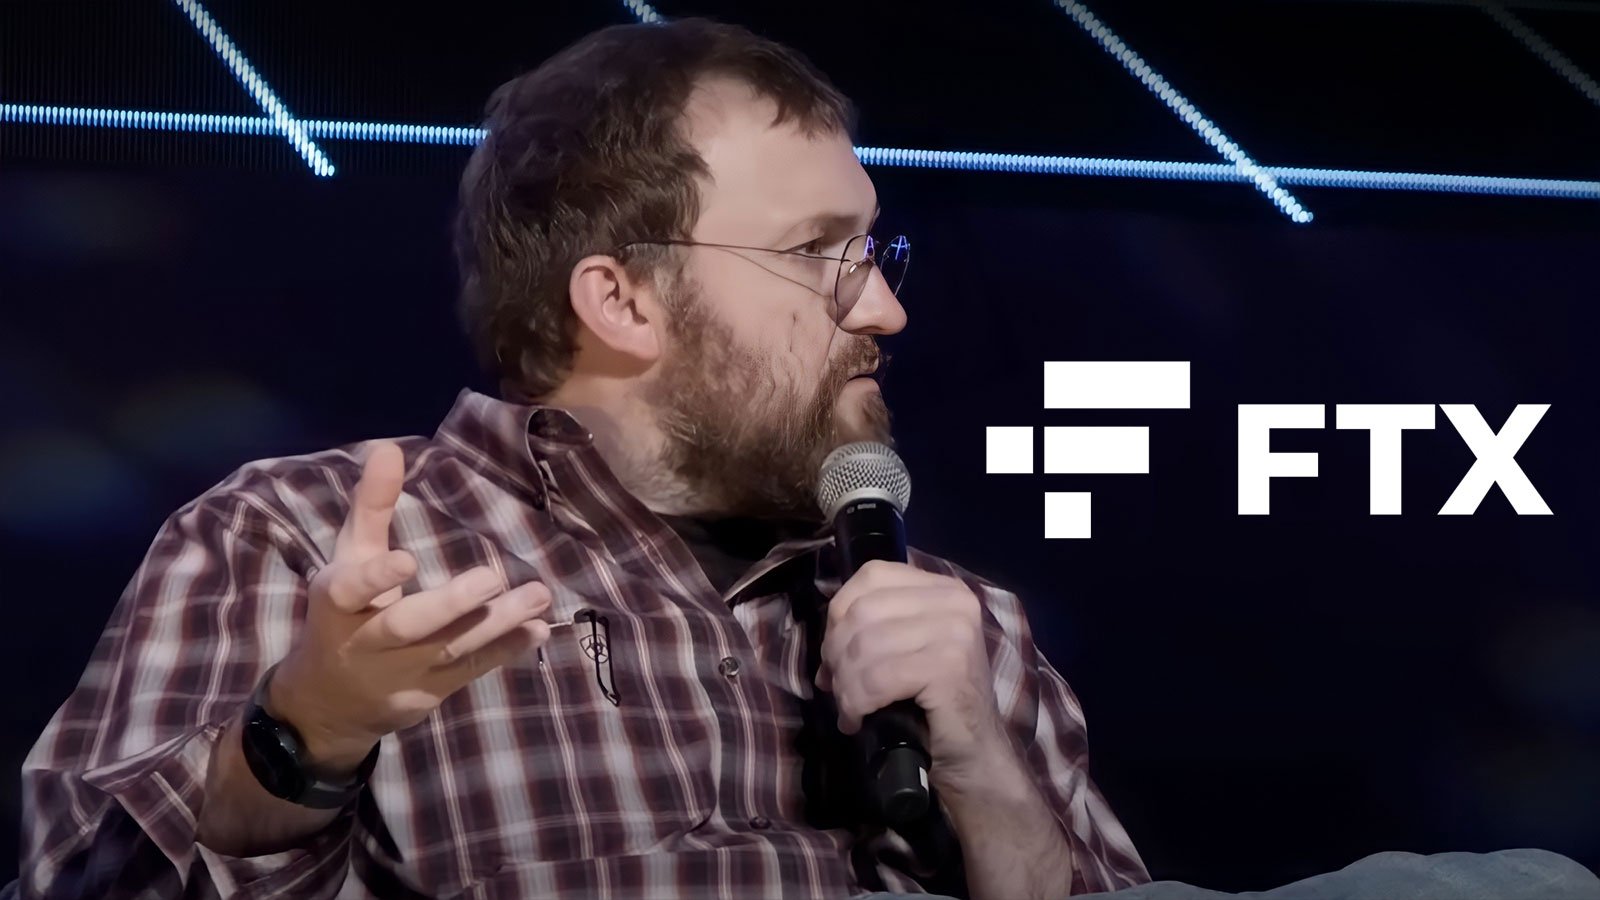 Cardano Founder on FTX: It Might Be Good Idea to Donate Some Money to Certain Politicians